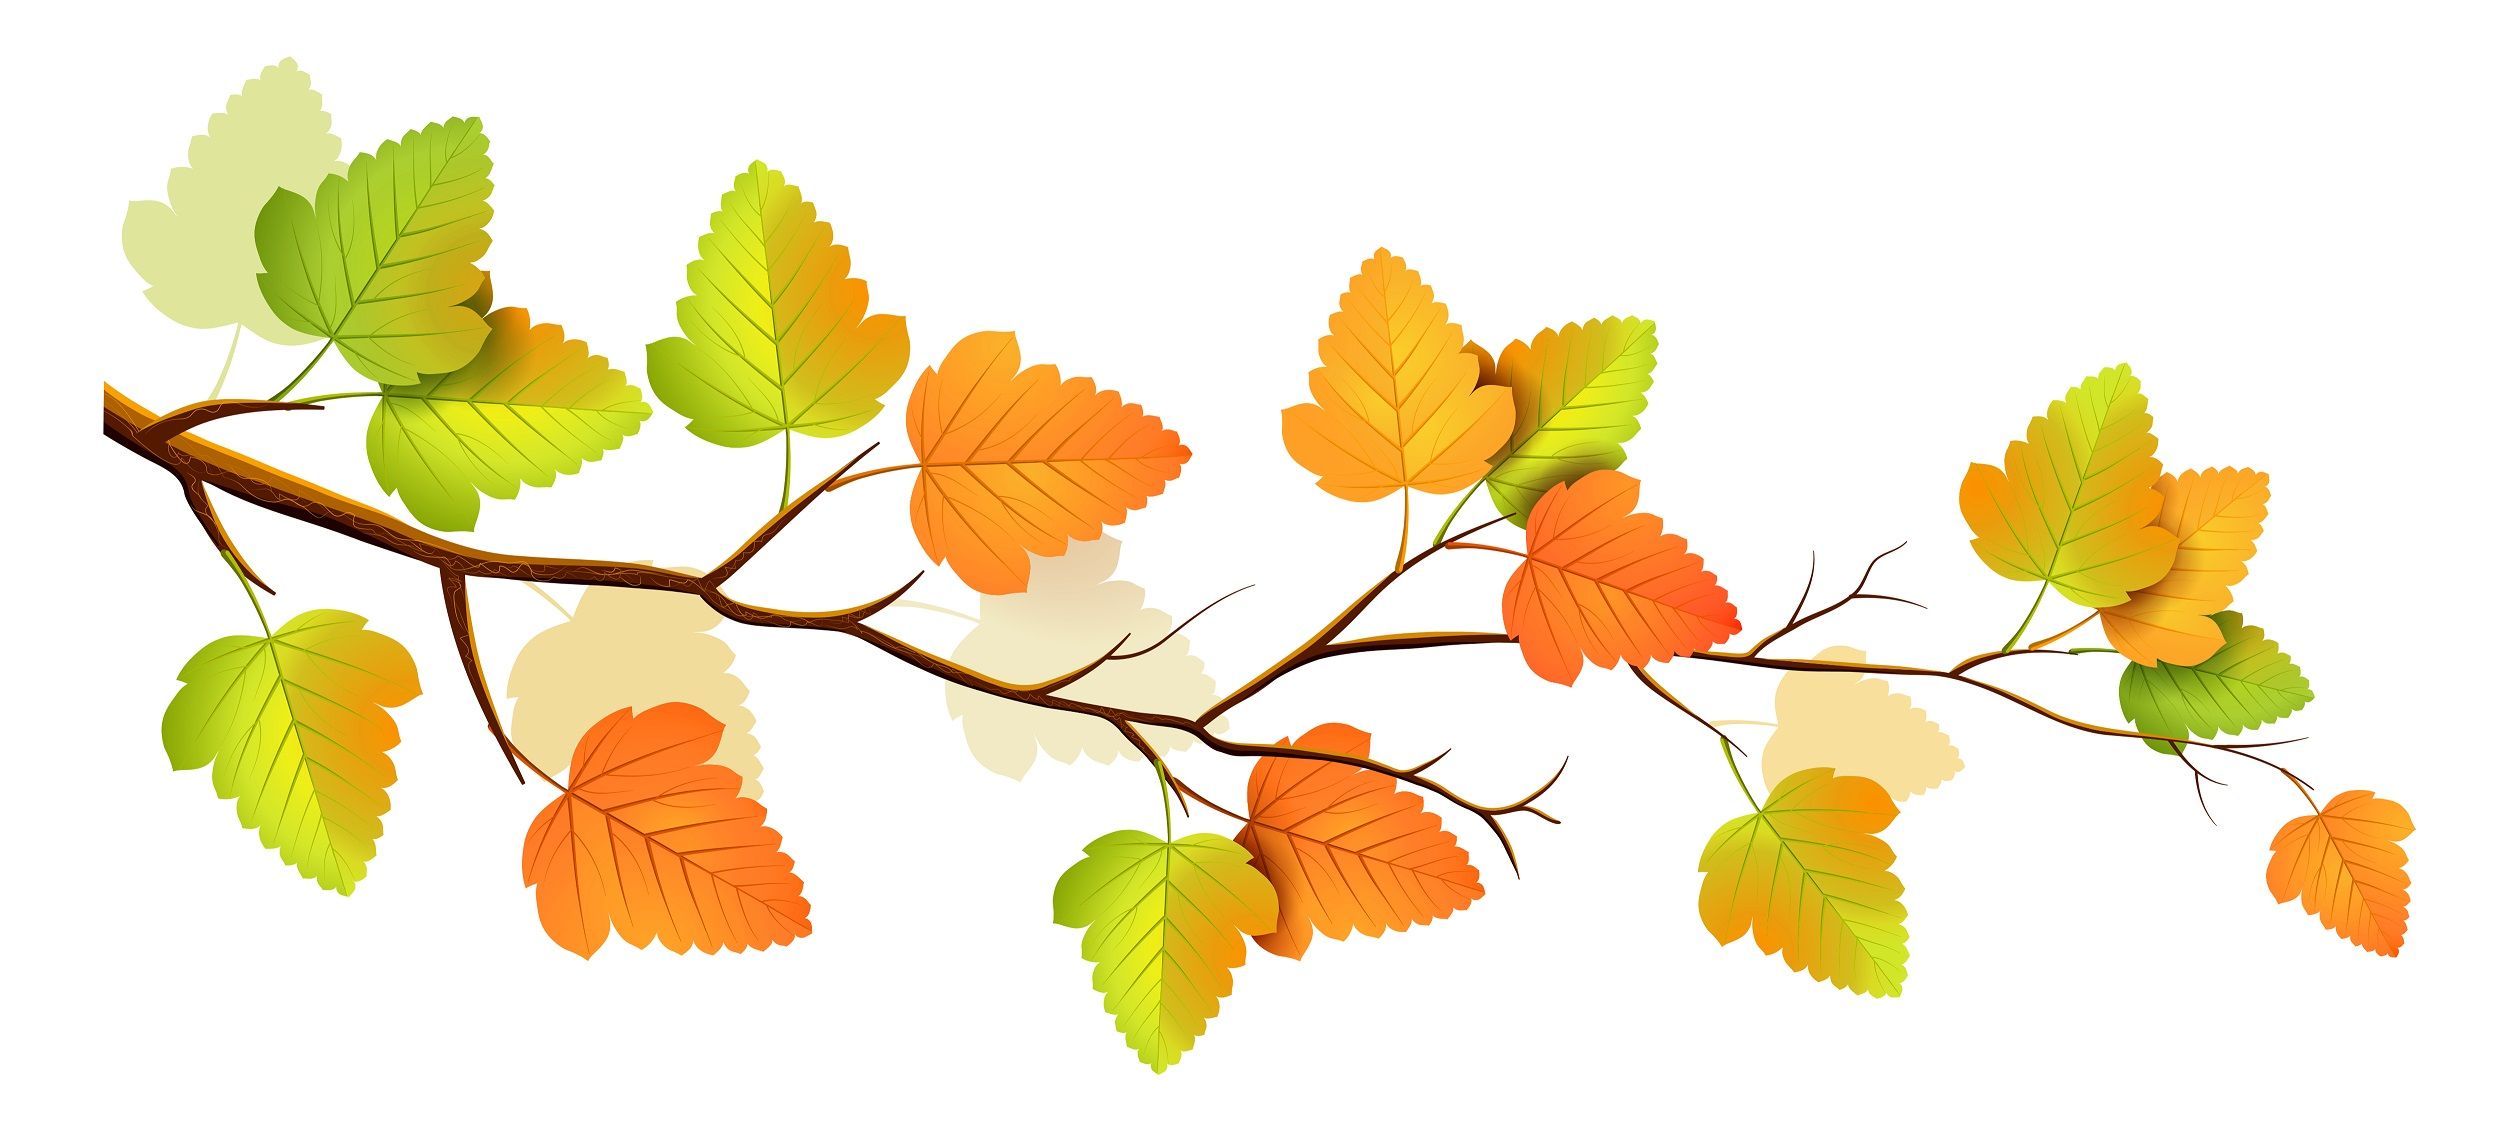 Fall leaves tree branch clip art 2500x1131. Clip art, Png flowers, Background image